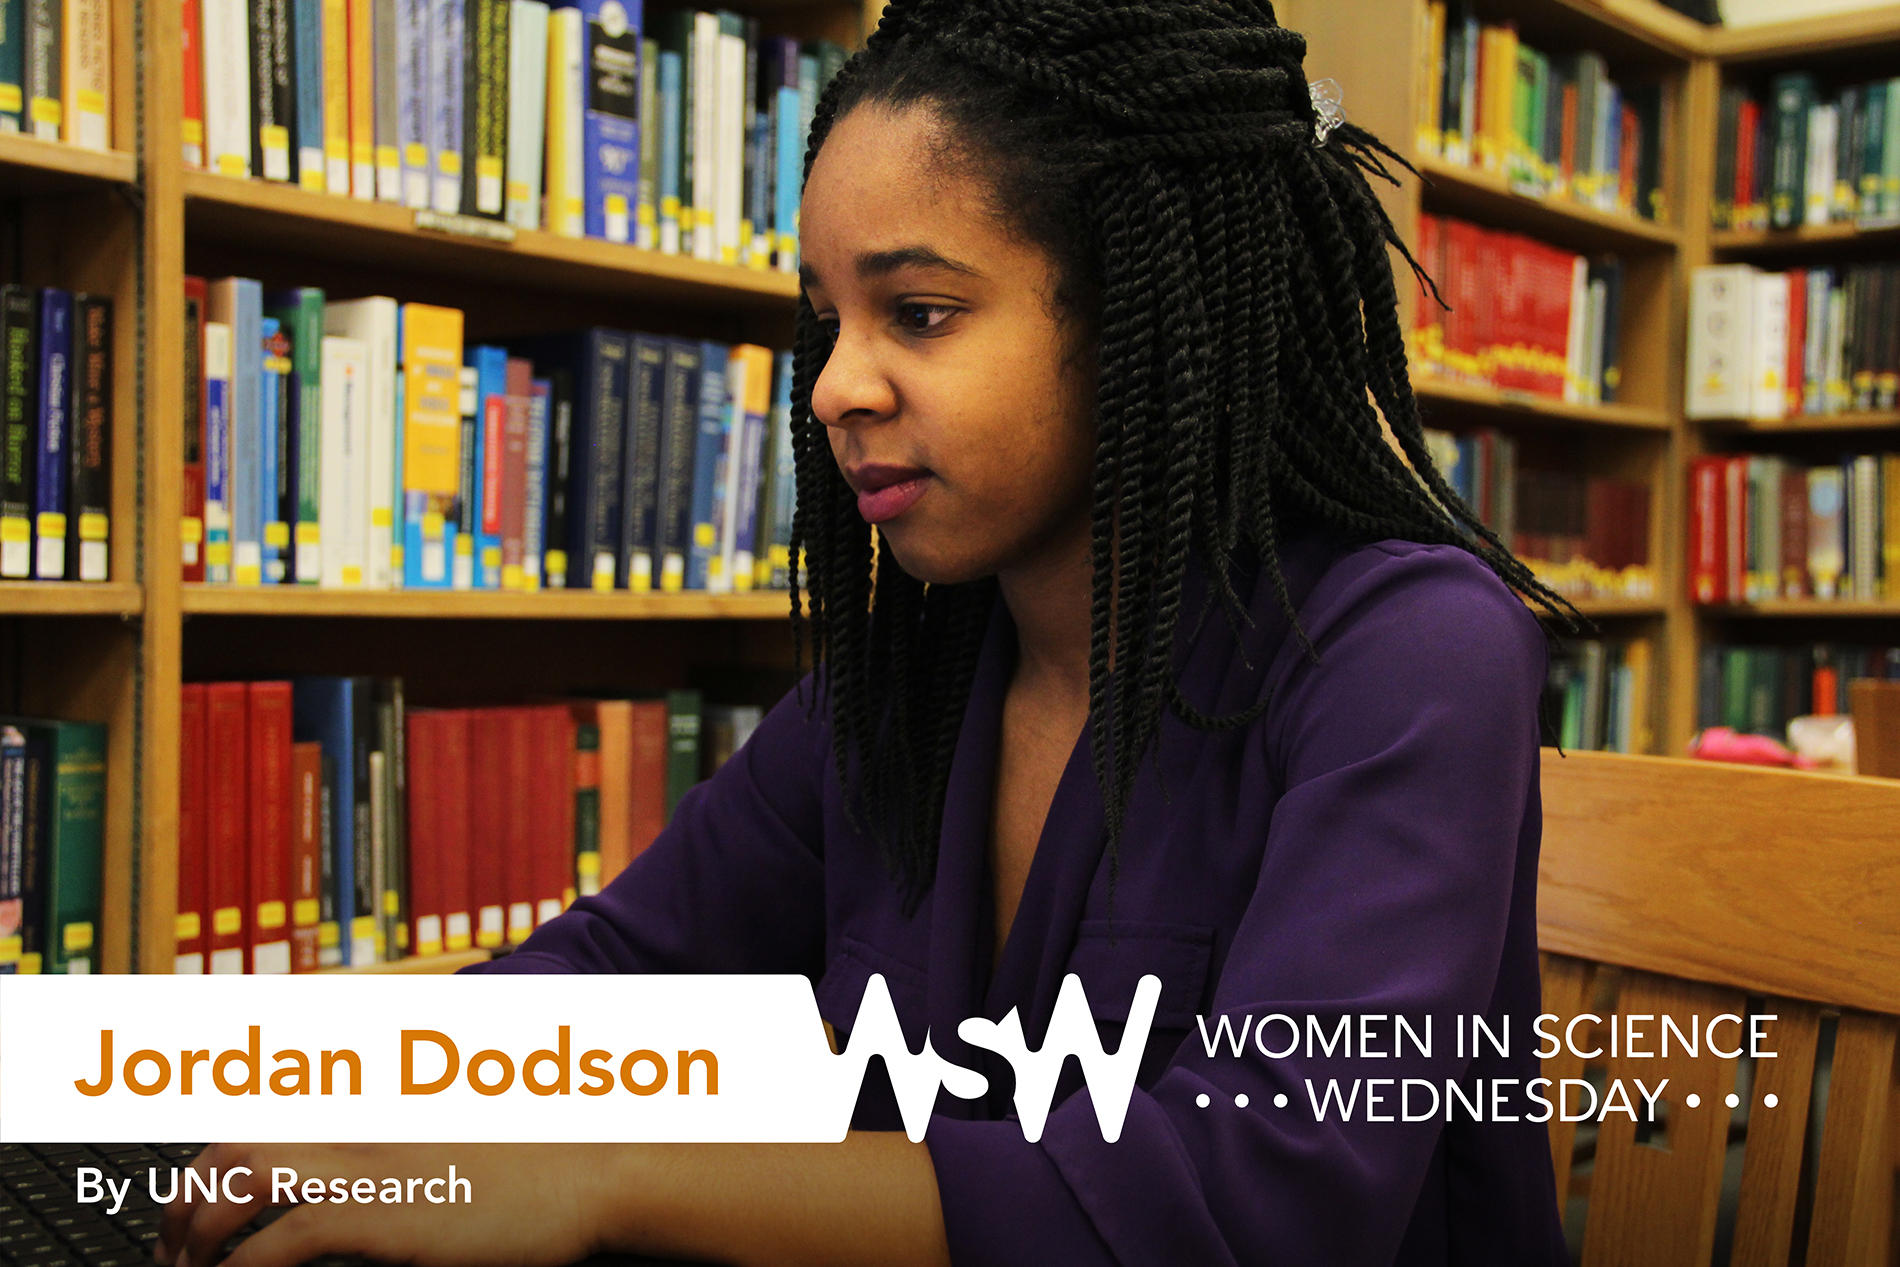 a young African-American woman works on her laptop in a library